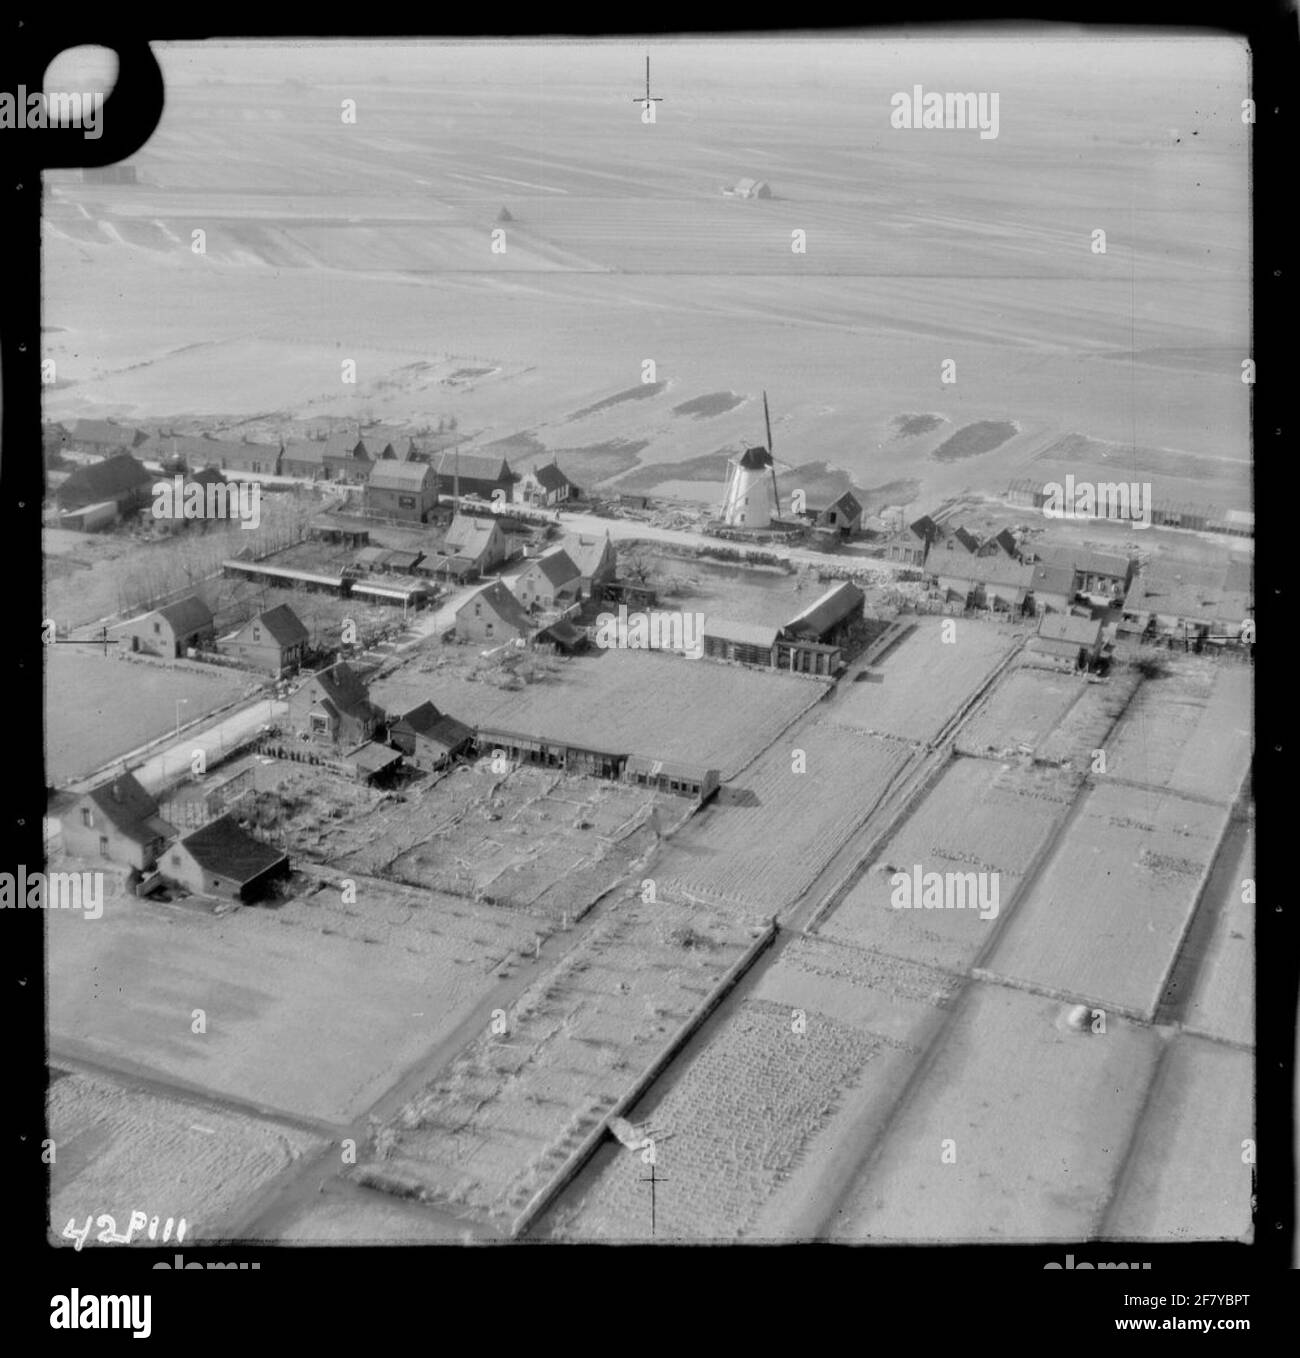 Watersnoodramp 1953. Air photo of Nieuwe-Tonge with an overview of the area affected by the disaster. Middle mill d'Oranjeboom on the Molendijk. Stock Photo